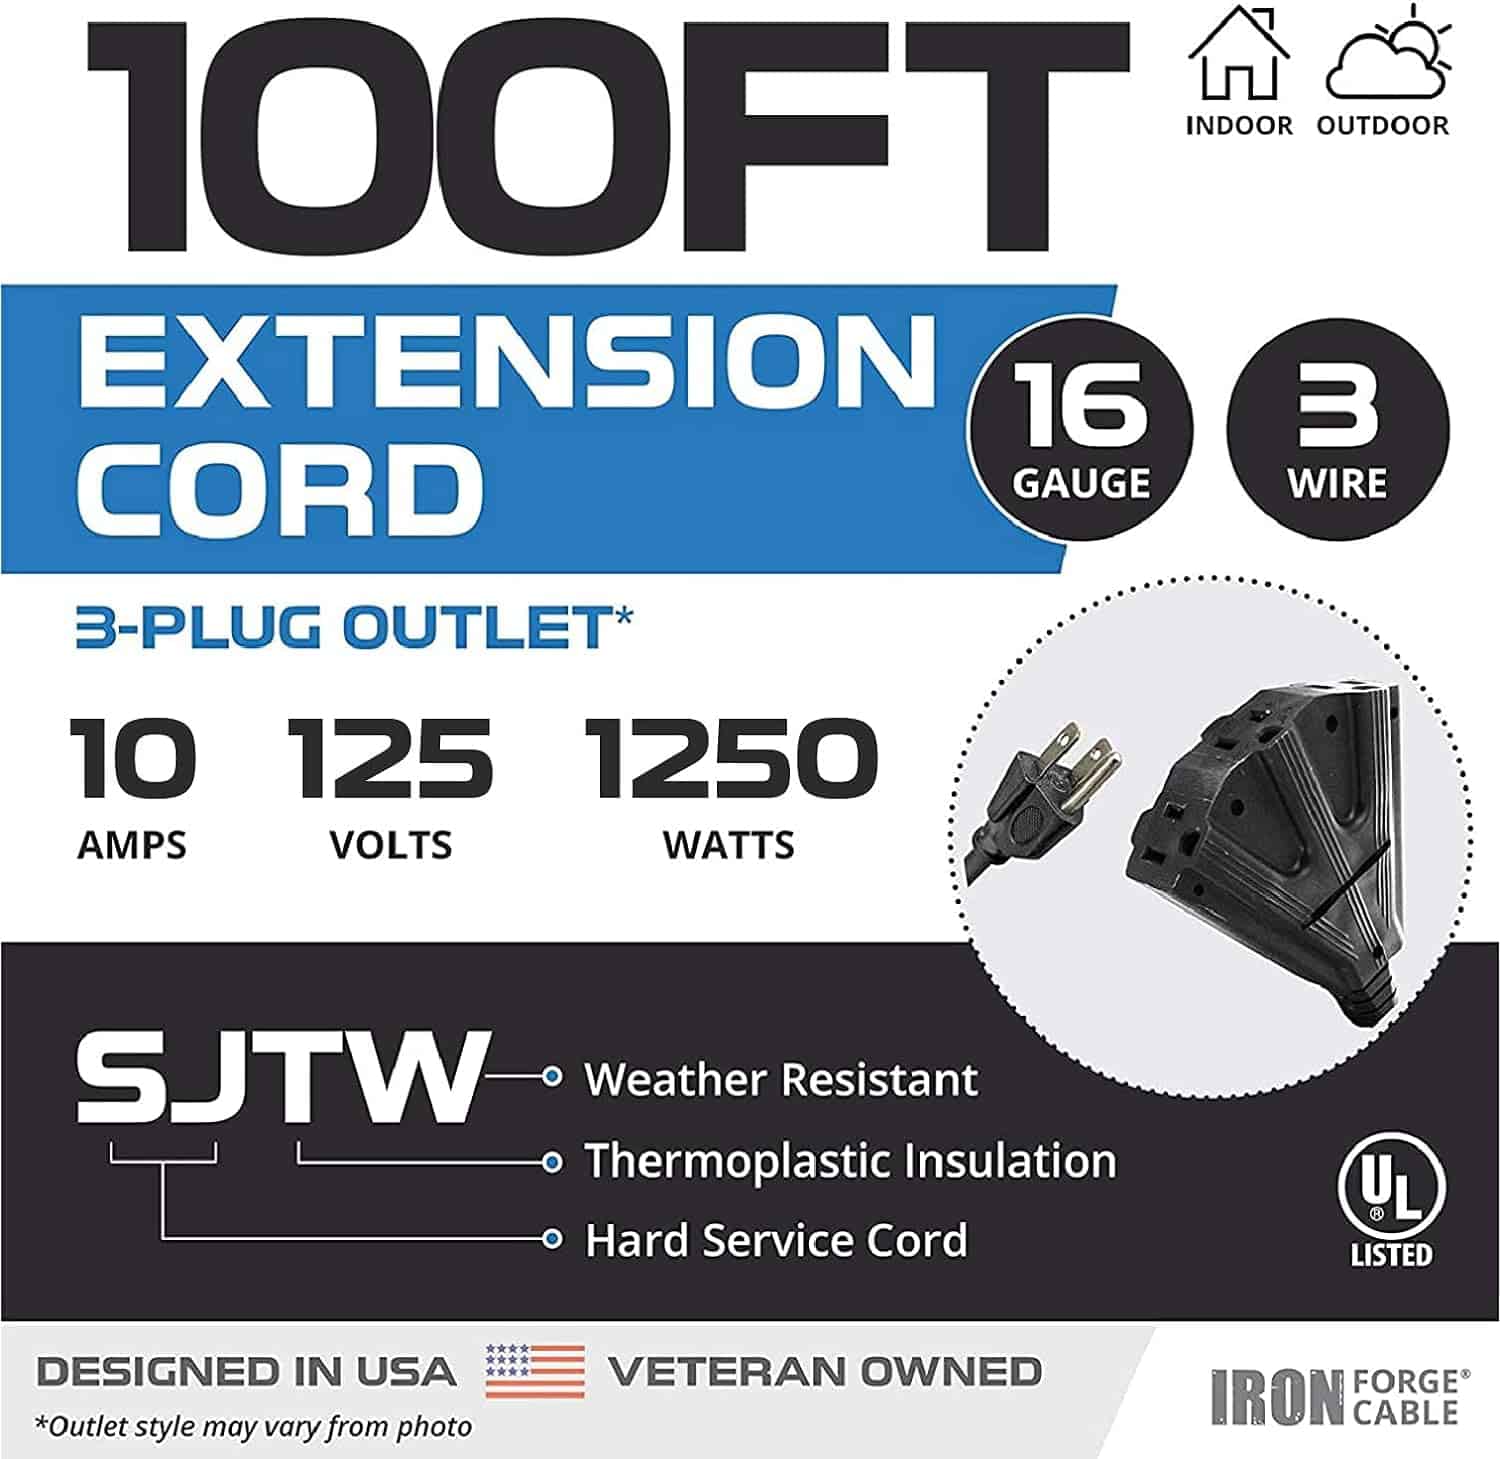 Iron Forge Cable 100ft Extension Cord with 3 Outlet 16 3 Weatherproof 100 ft Black Extension Cord with Multiple Outlets 3 Prong for Landscaping Lawn 2